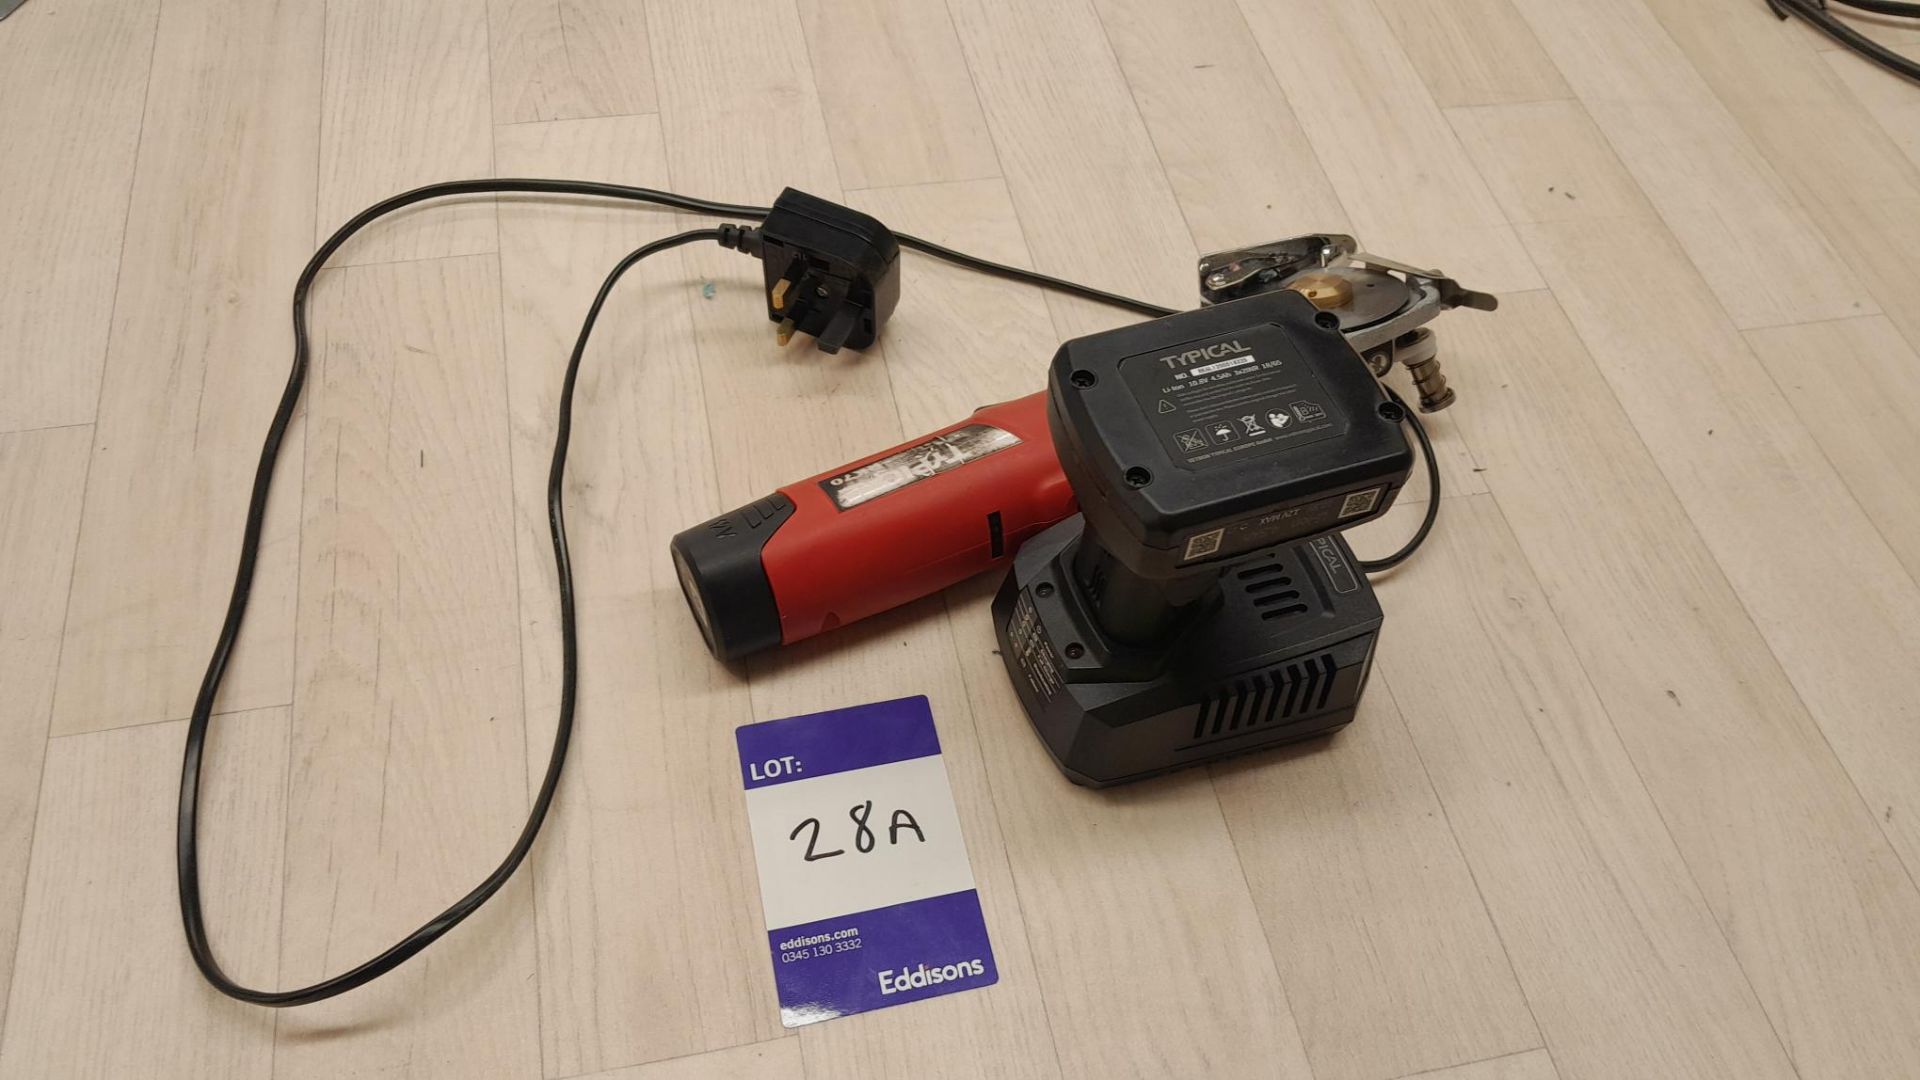 Typical TY-RK70 Battery Hand Cutter Serial Number RK70200911361 with charger and spare battery (